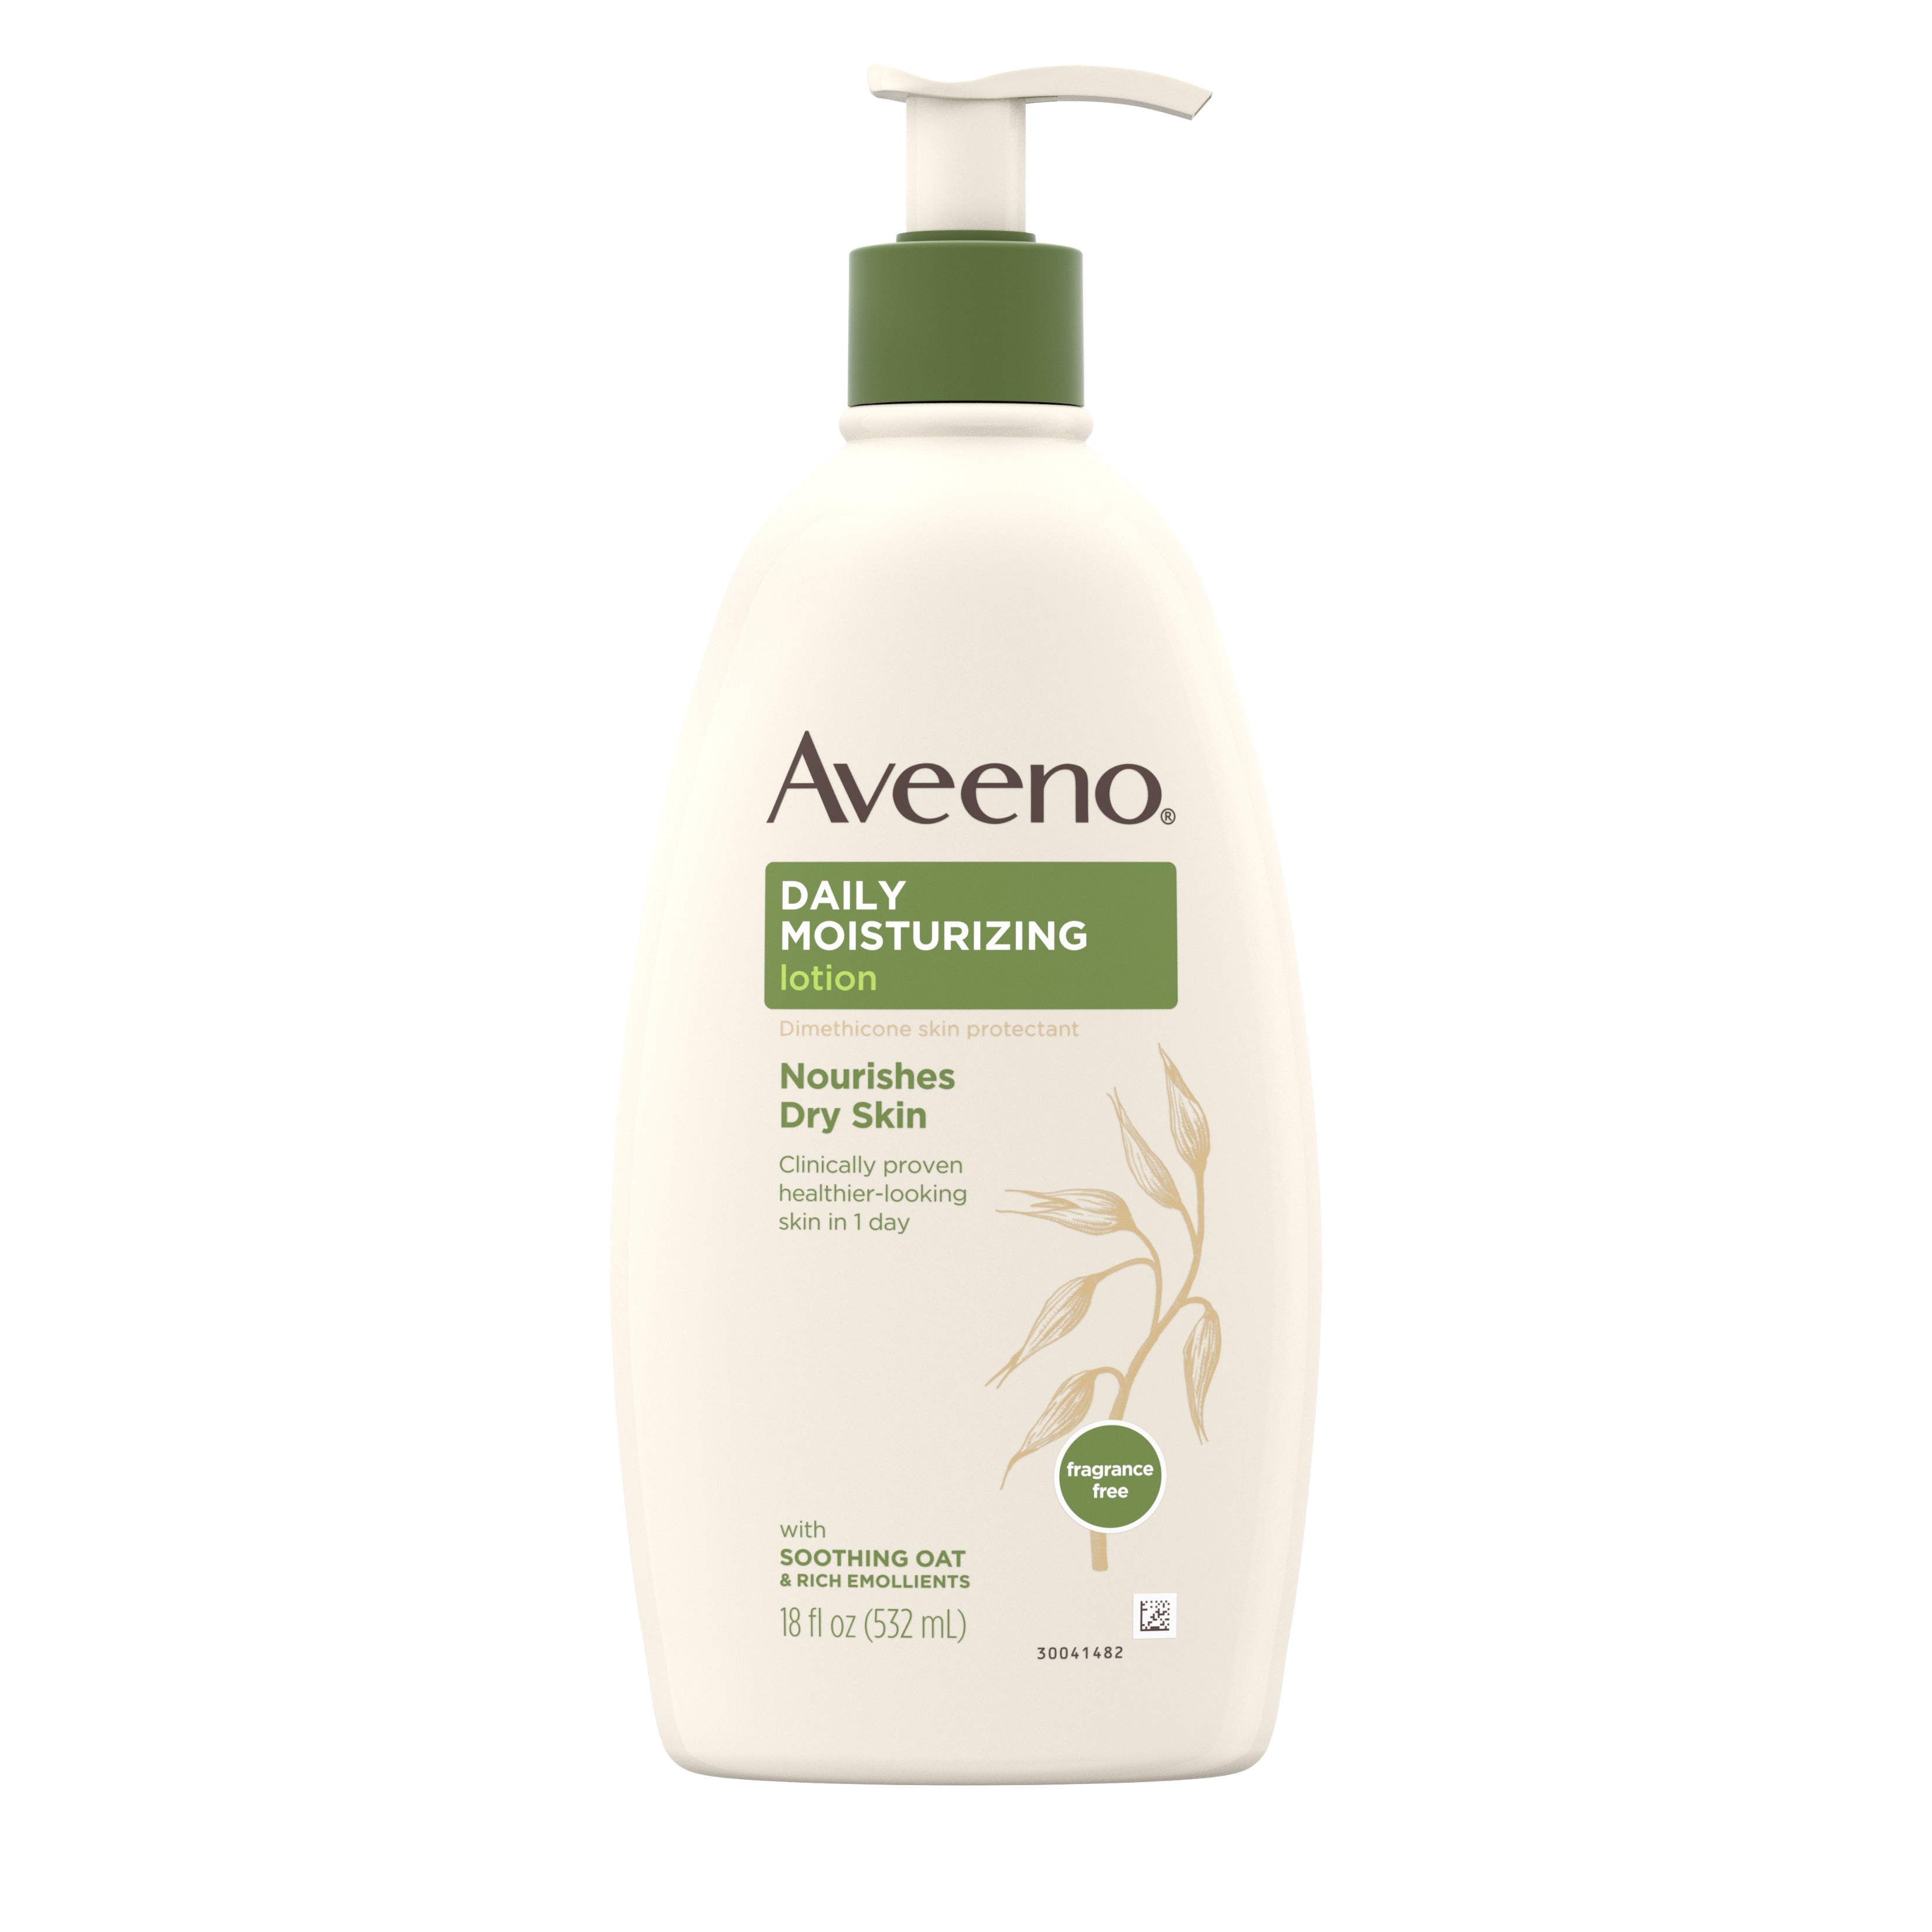 Aveeno Daily Moisturizing Lotion with Soothing Oat 354ml